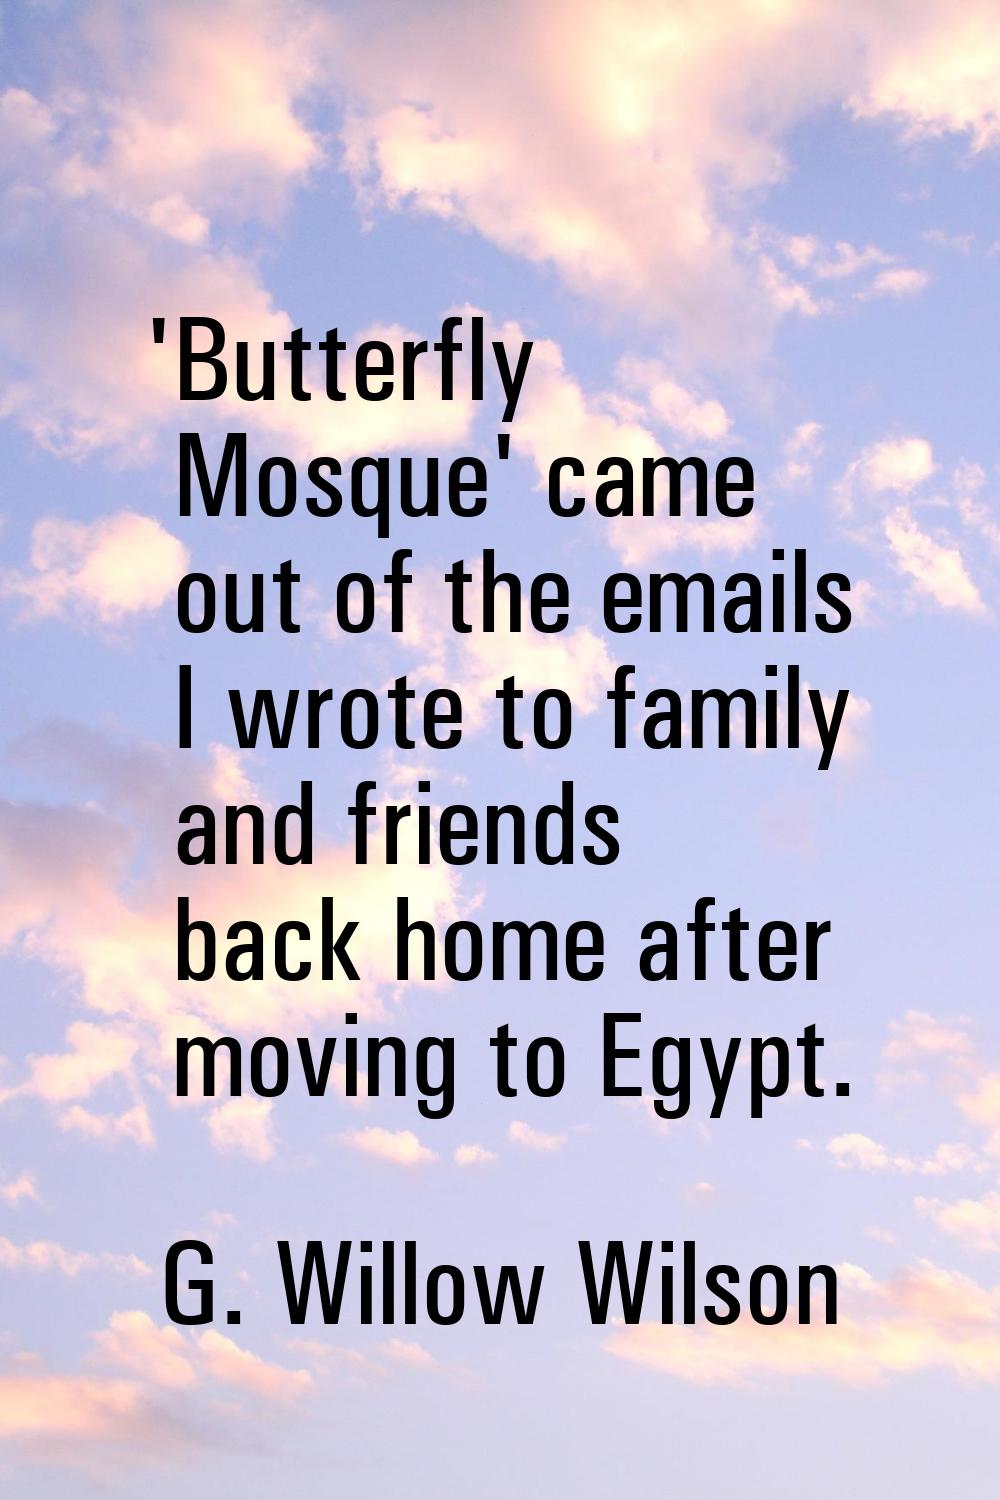 'Butterfly Mosque' came out of the emails I wrote to family and friends back home after moving to E